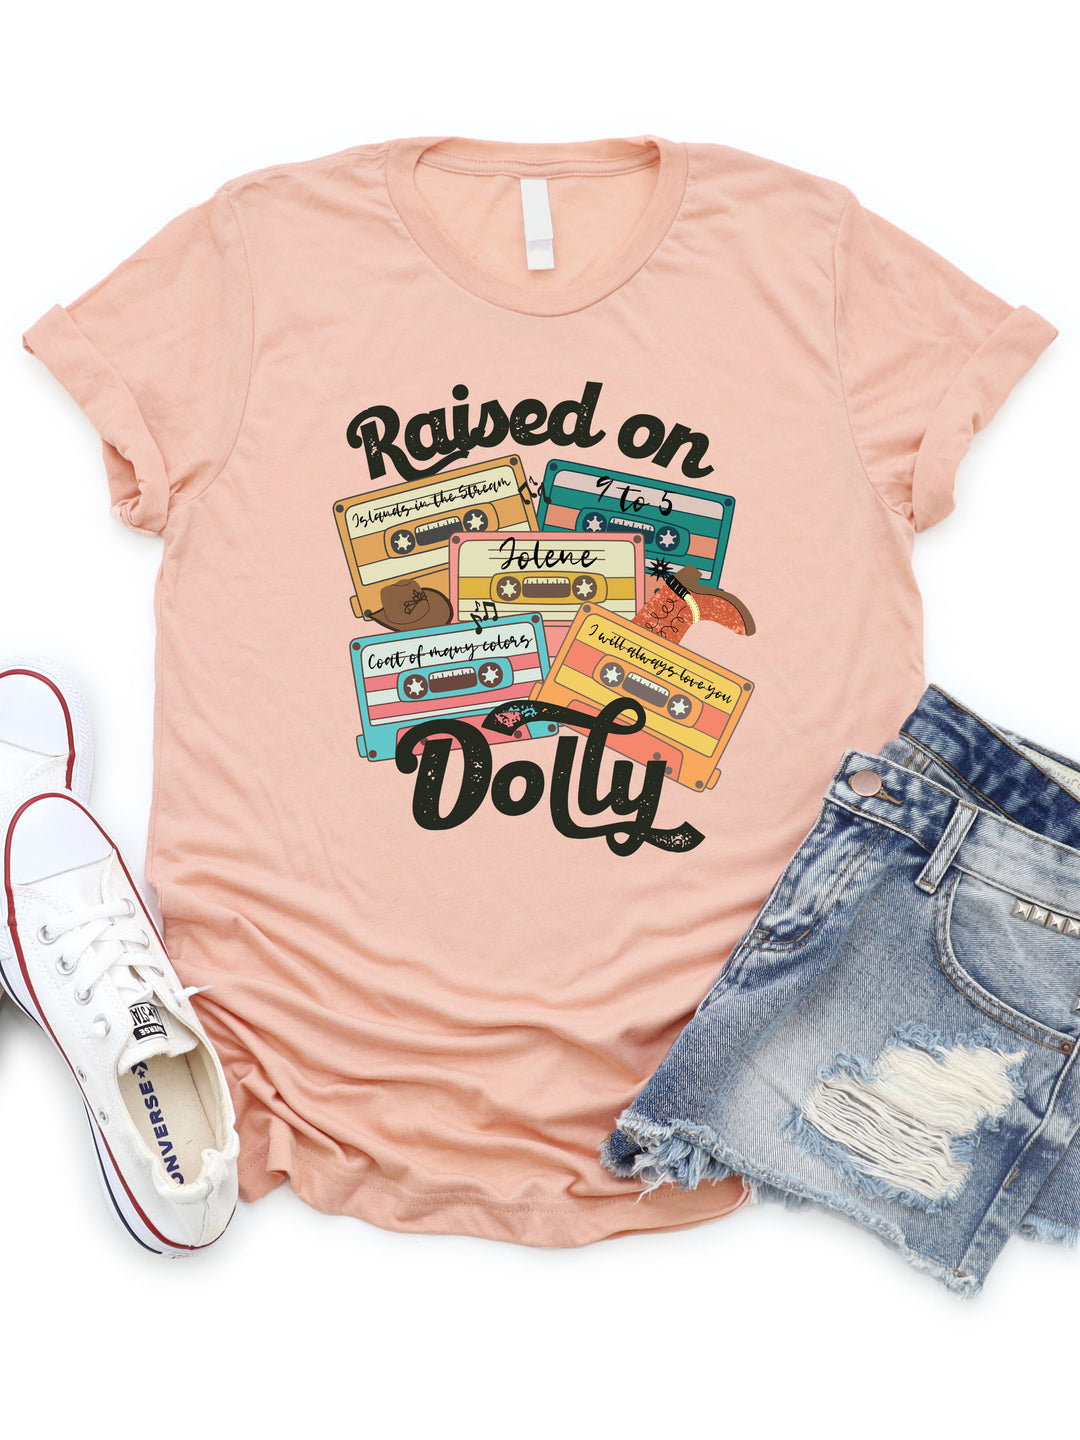 Raised on Dolly Graphic Tee